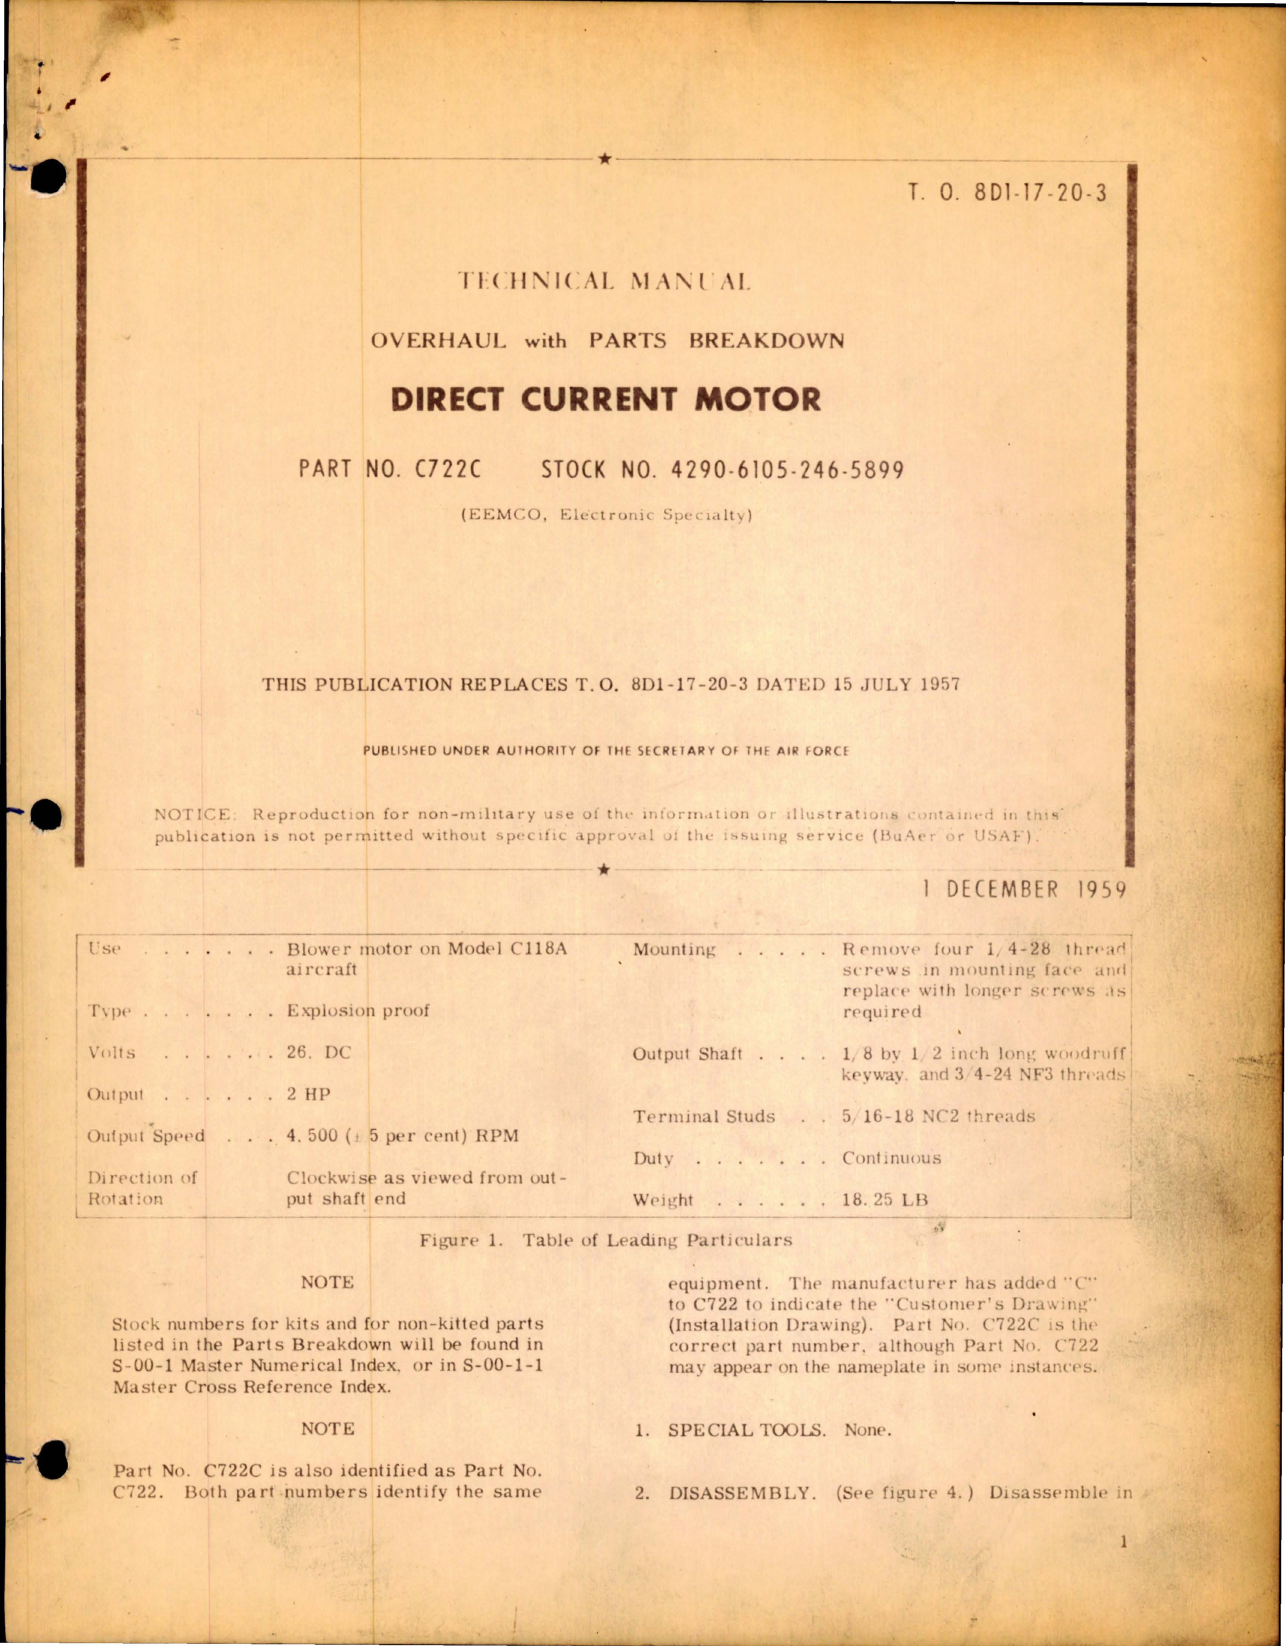 Sample page 1 from AirCorps Library document: Overhaul with Parts for Direct Current Motor - Part C722C - Stock 4290-6105-246-5899 